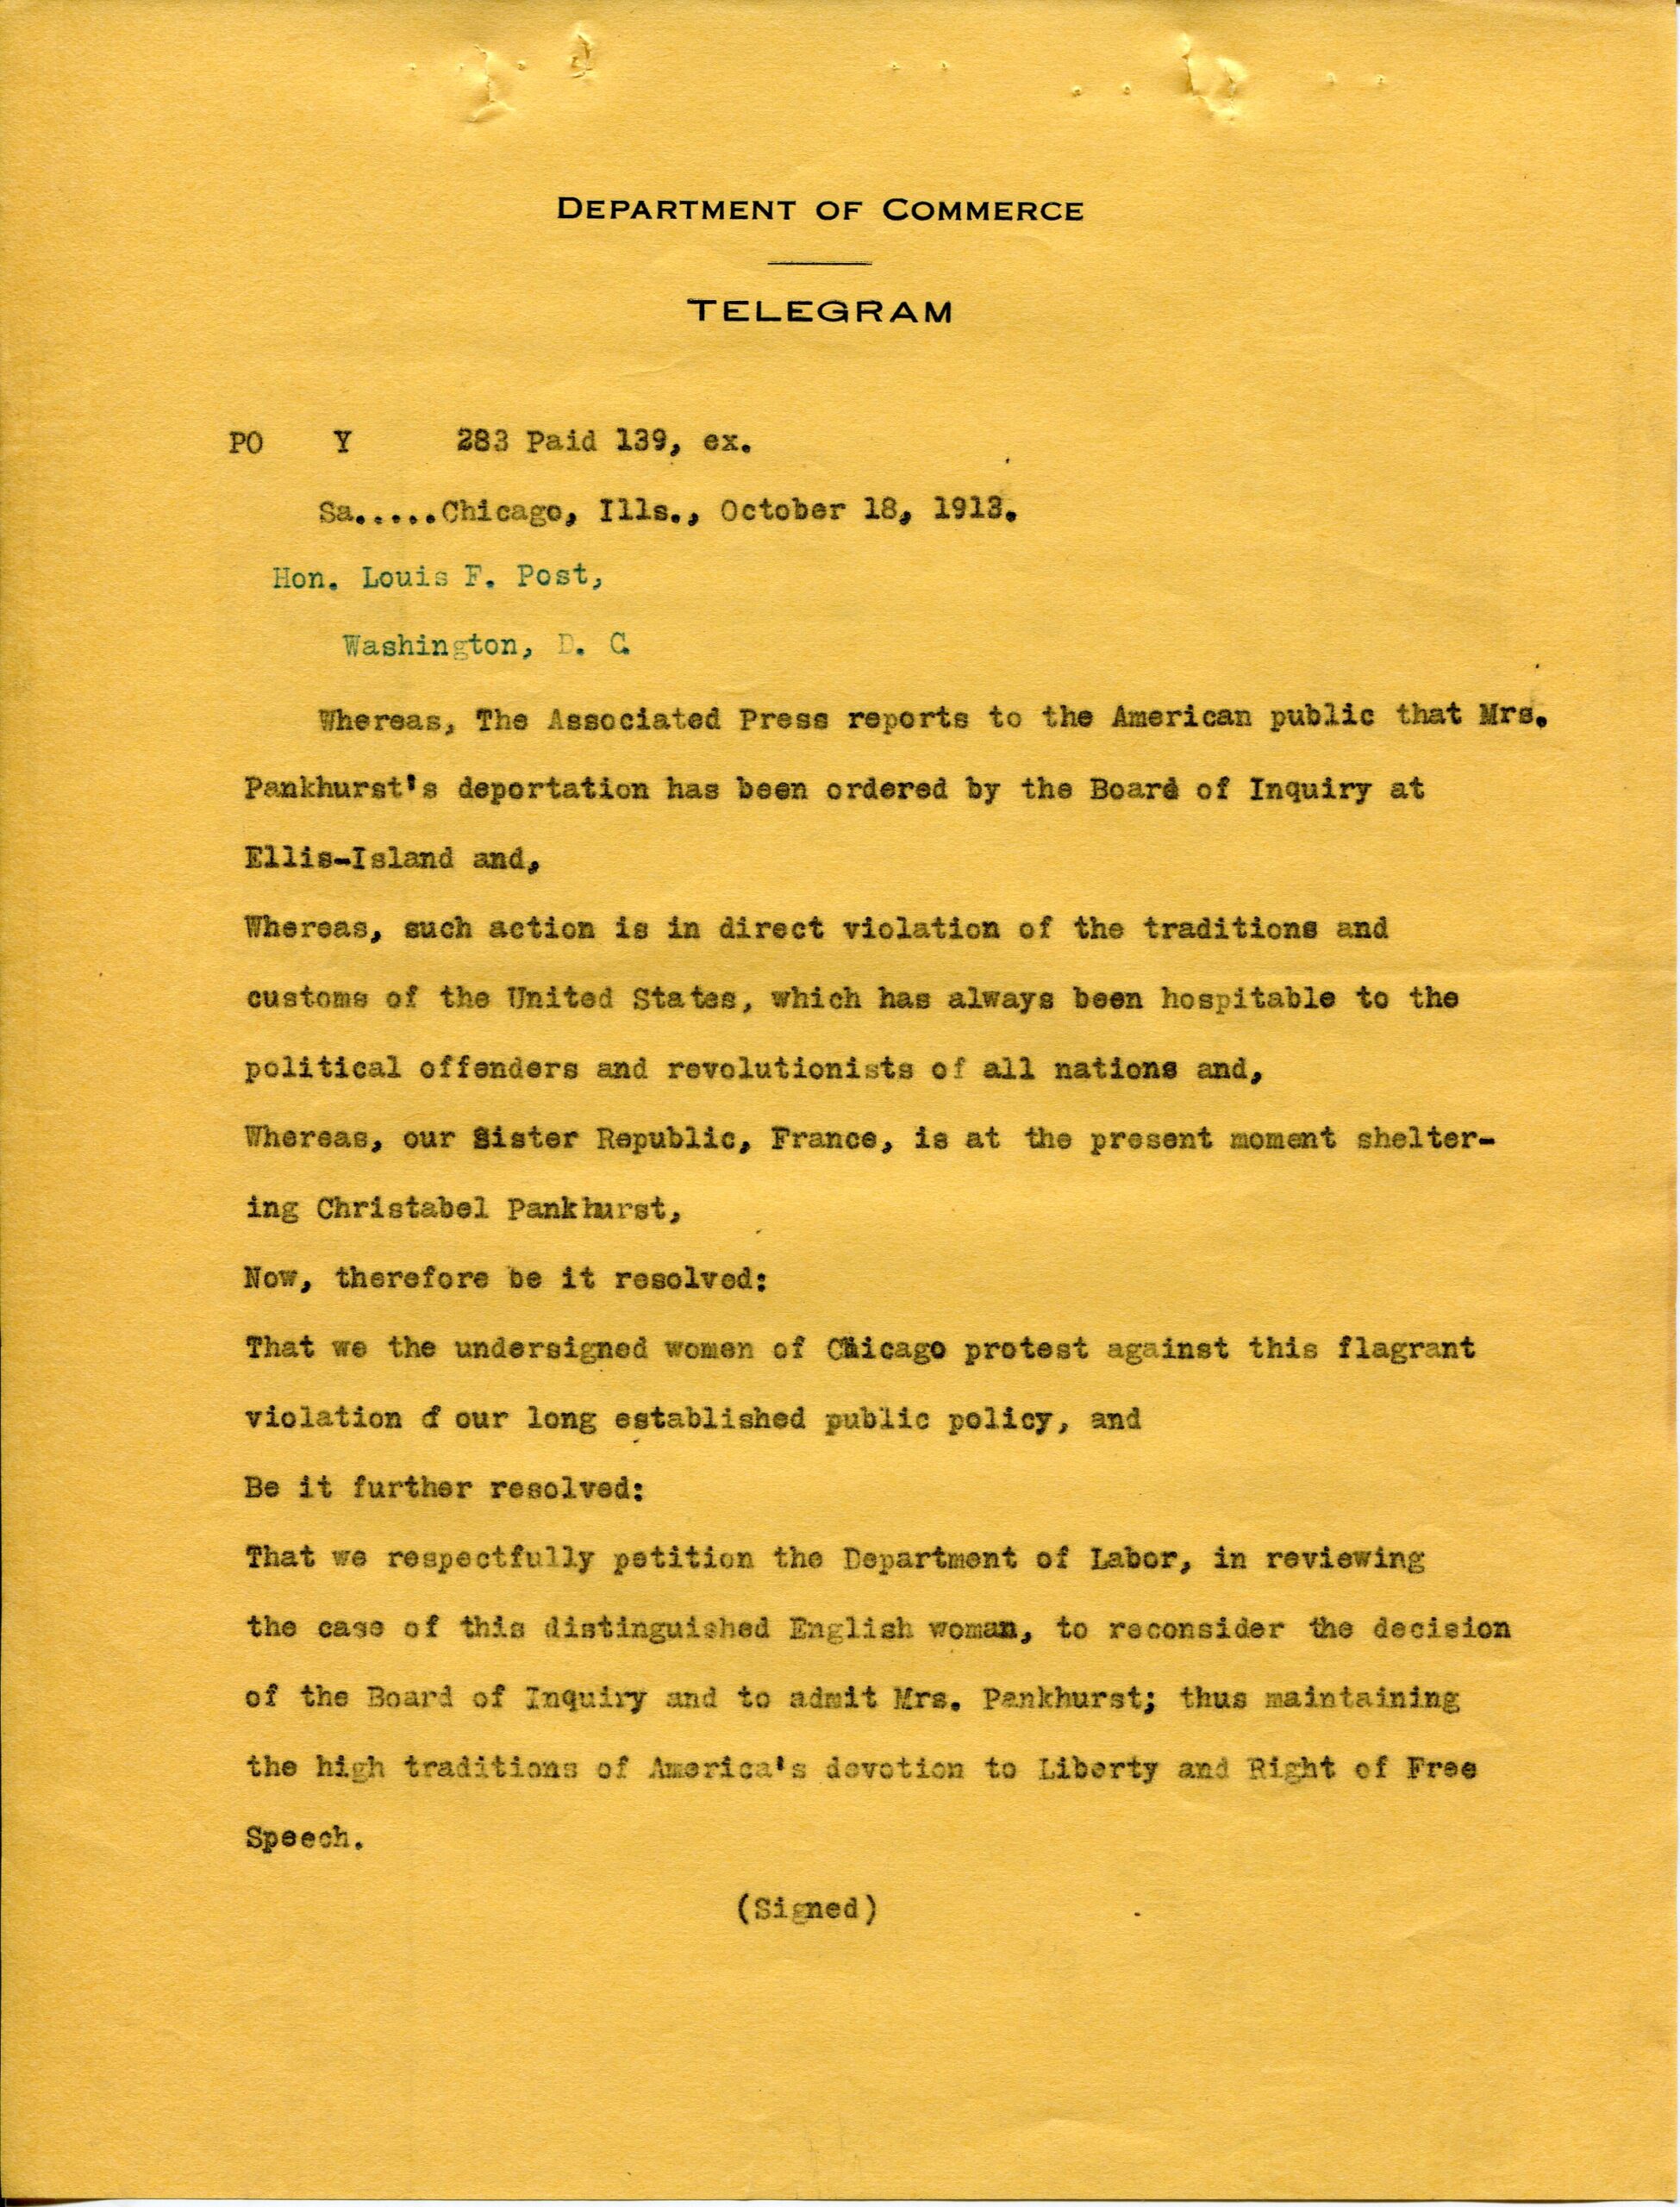 Telegram from a Group of Women in Chicago, including Jane Addams, to Louis F. Post, Assistant Secretary of the Department of Labor